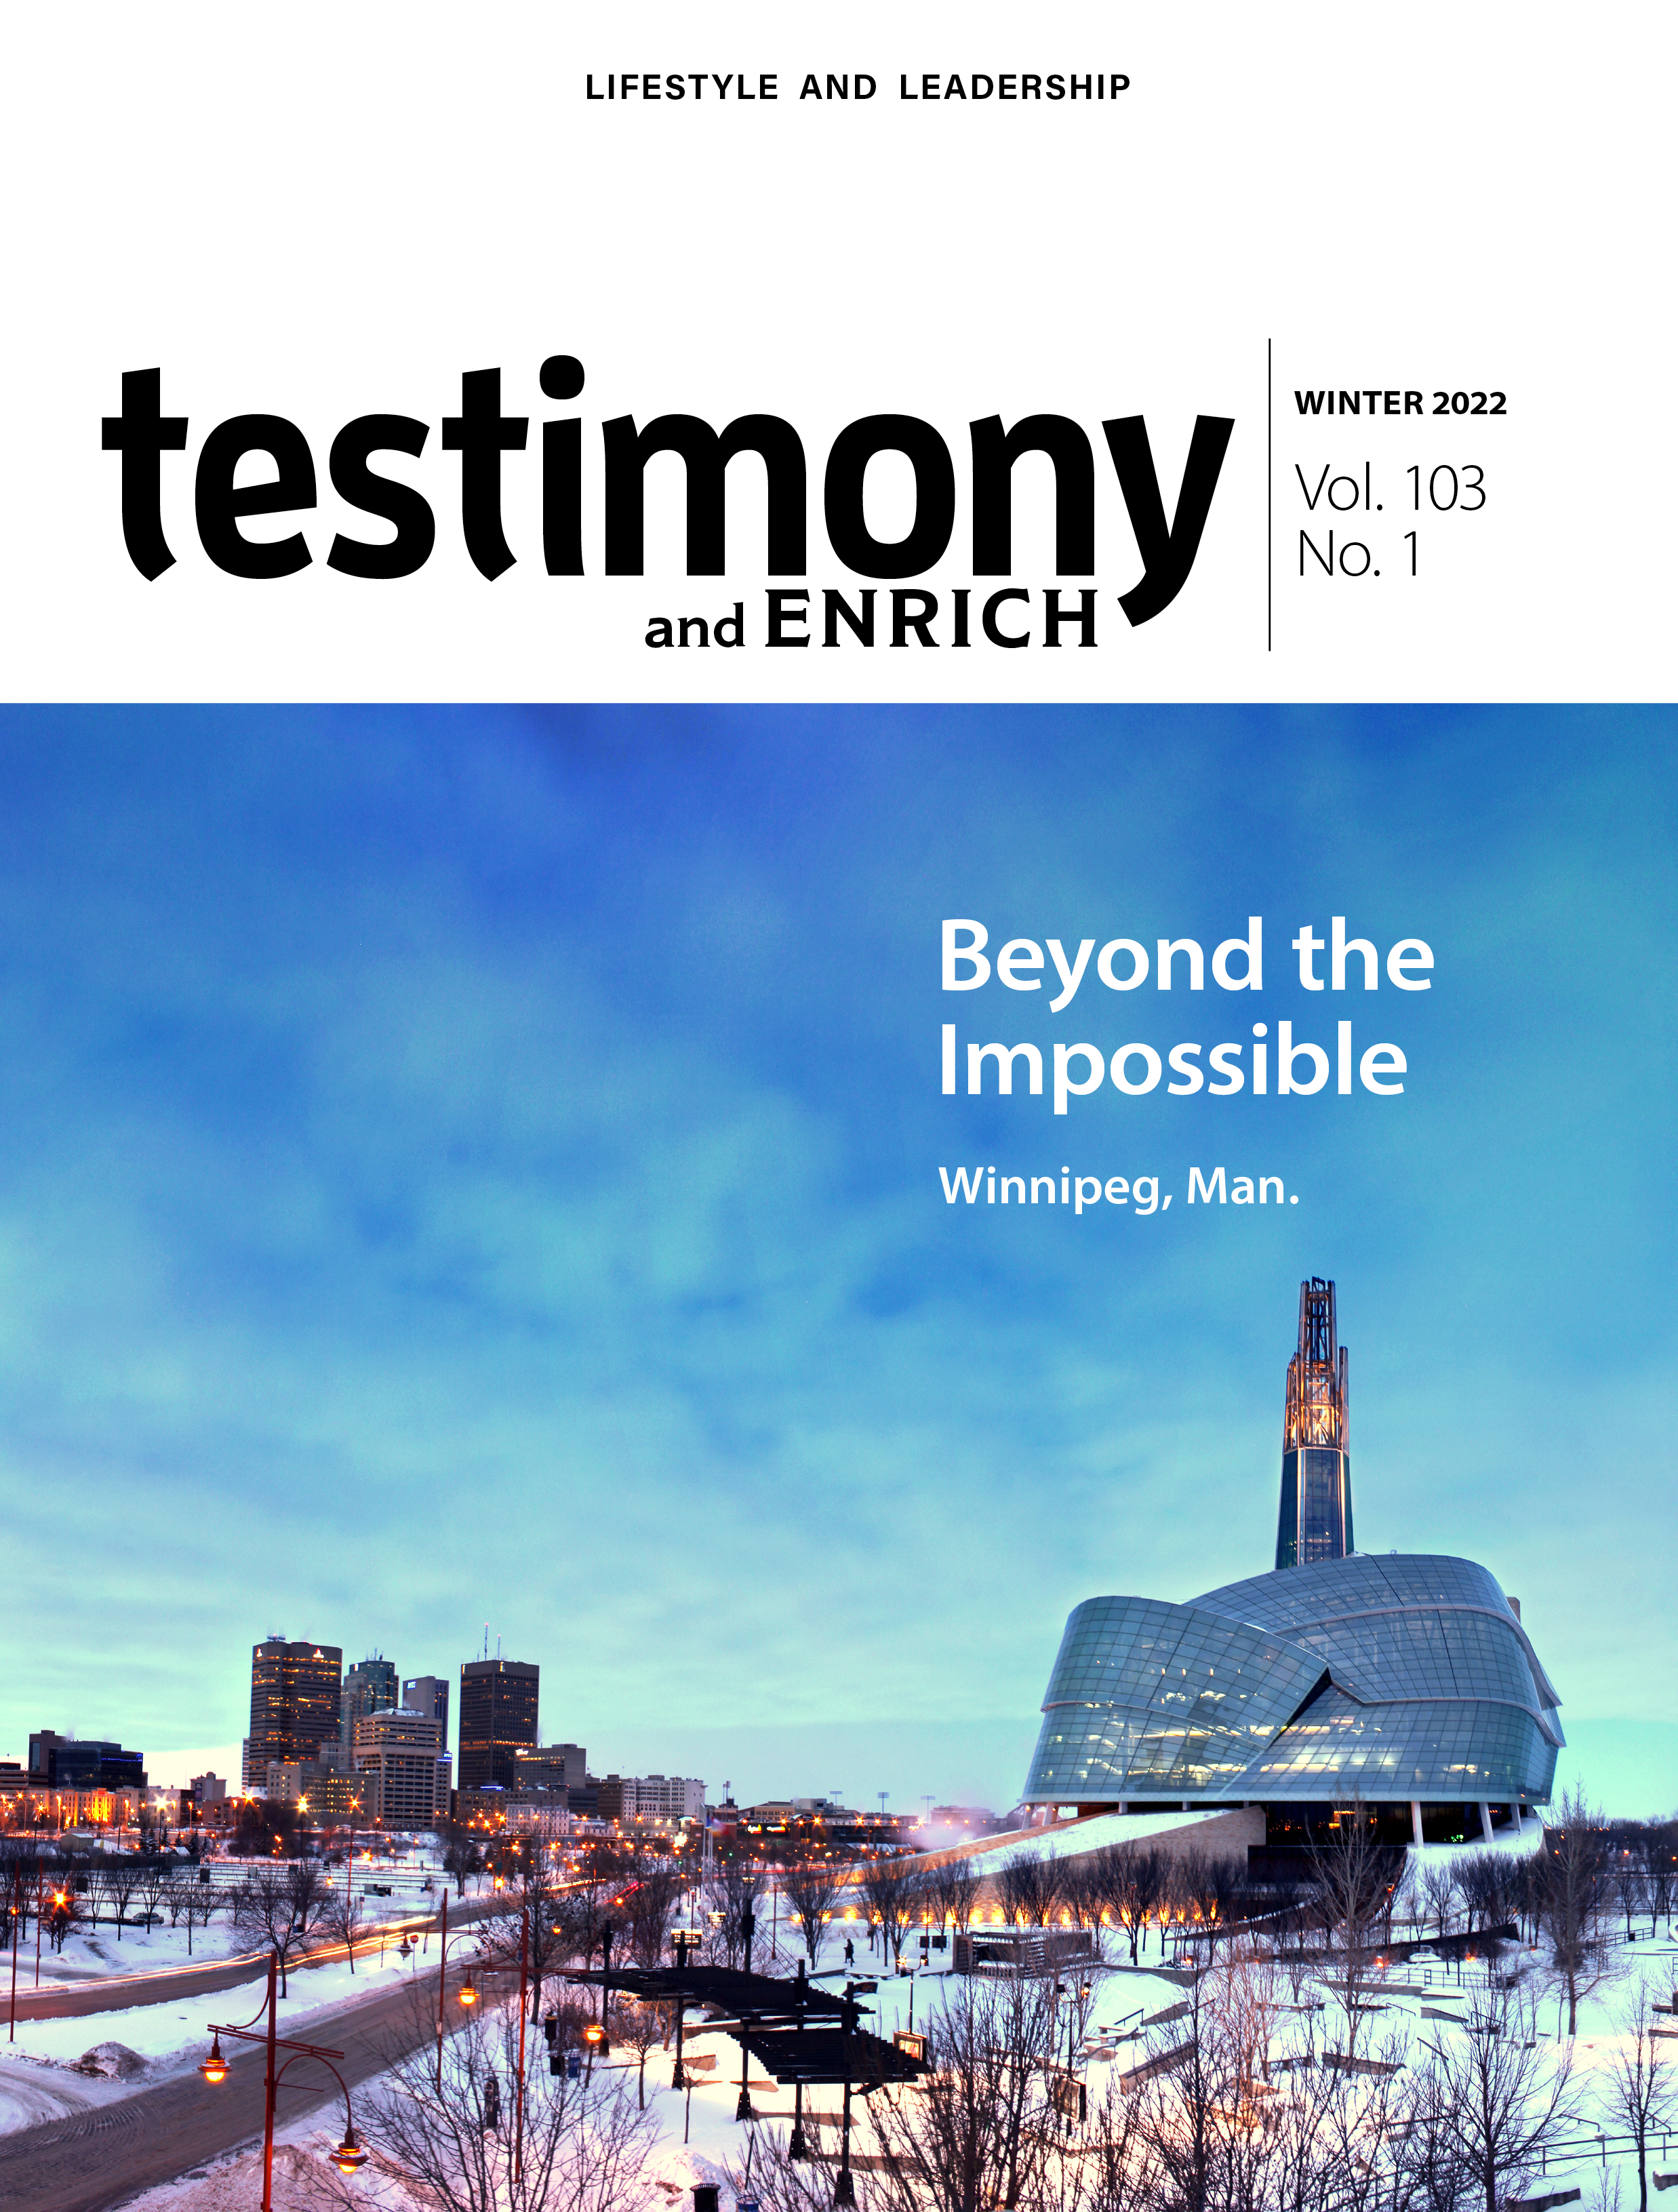 Front cover of Winter 2022 issue of testimony/Enrich.